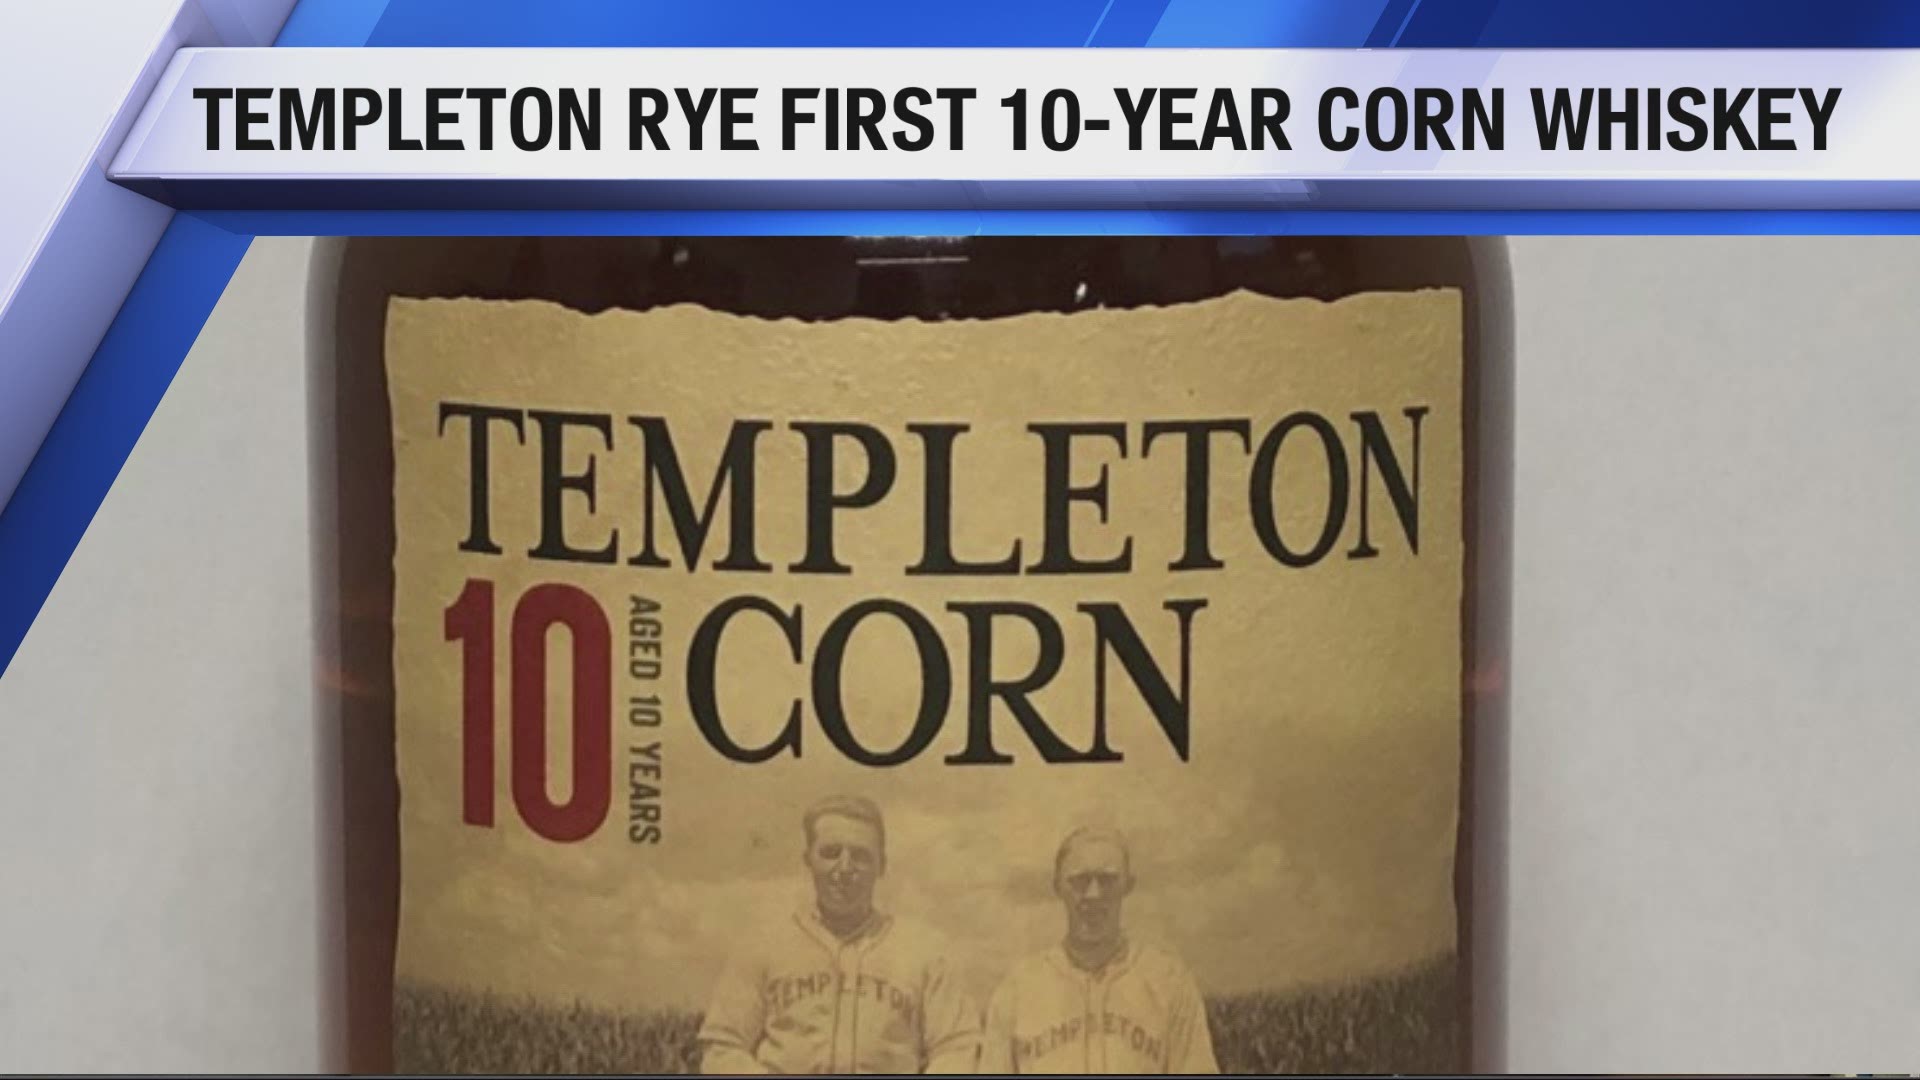 Templeton Rye Distillery releases first-ever 10-year corn whiskey featuring a unique “Field of Dreams” inspired label.